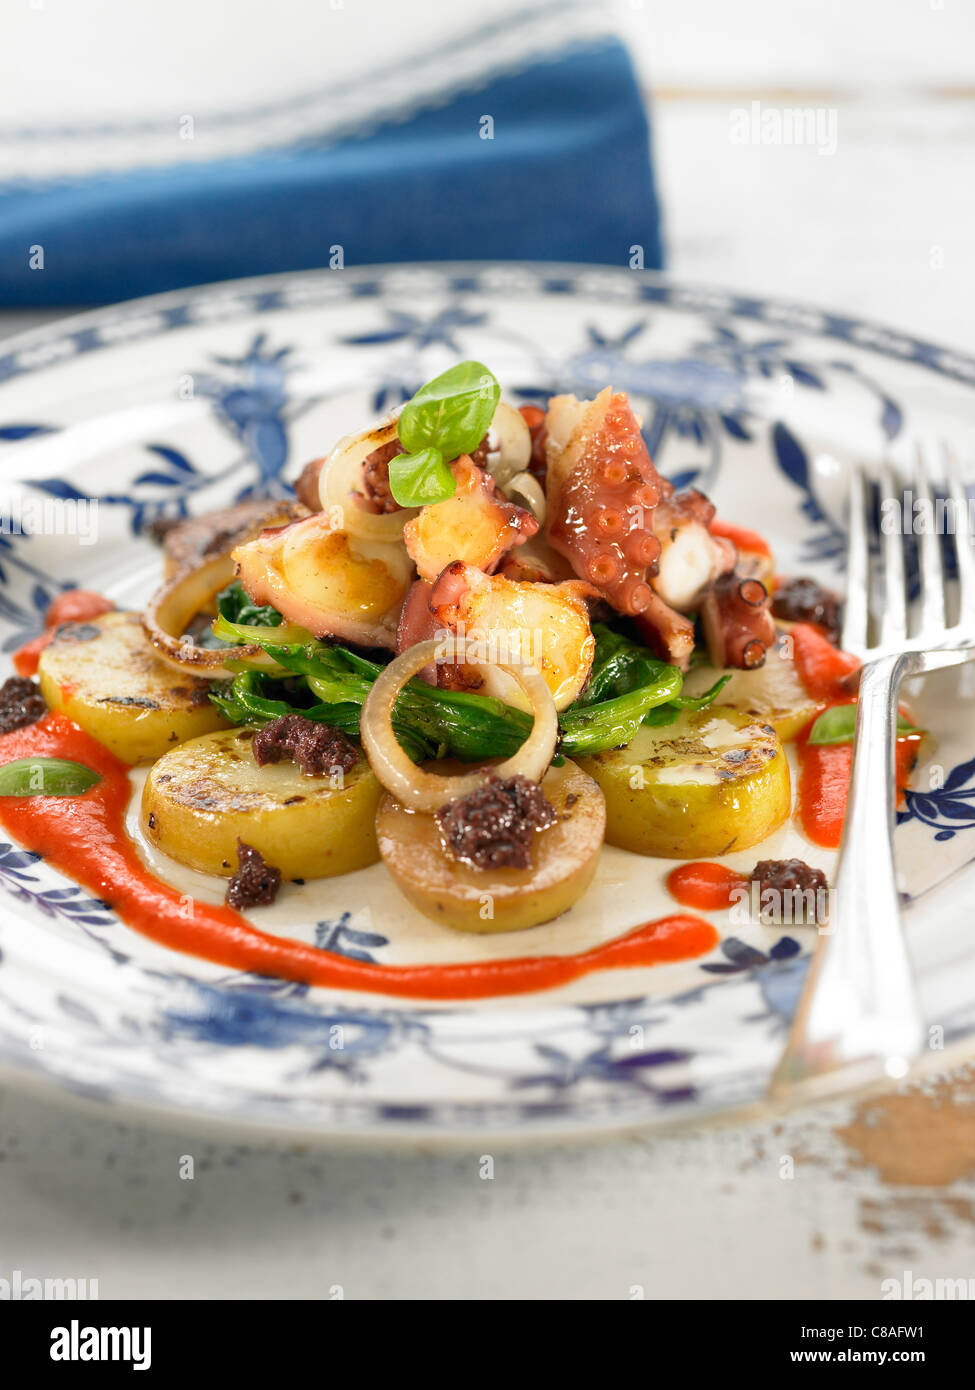 Octopus with potatoes,young turnips and red pepper puree Stock Photo